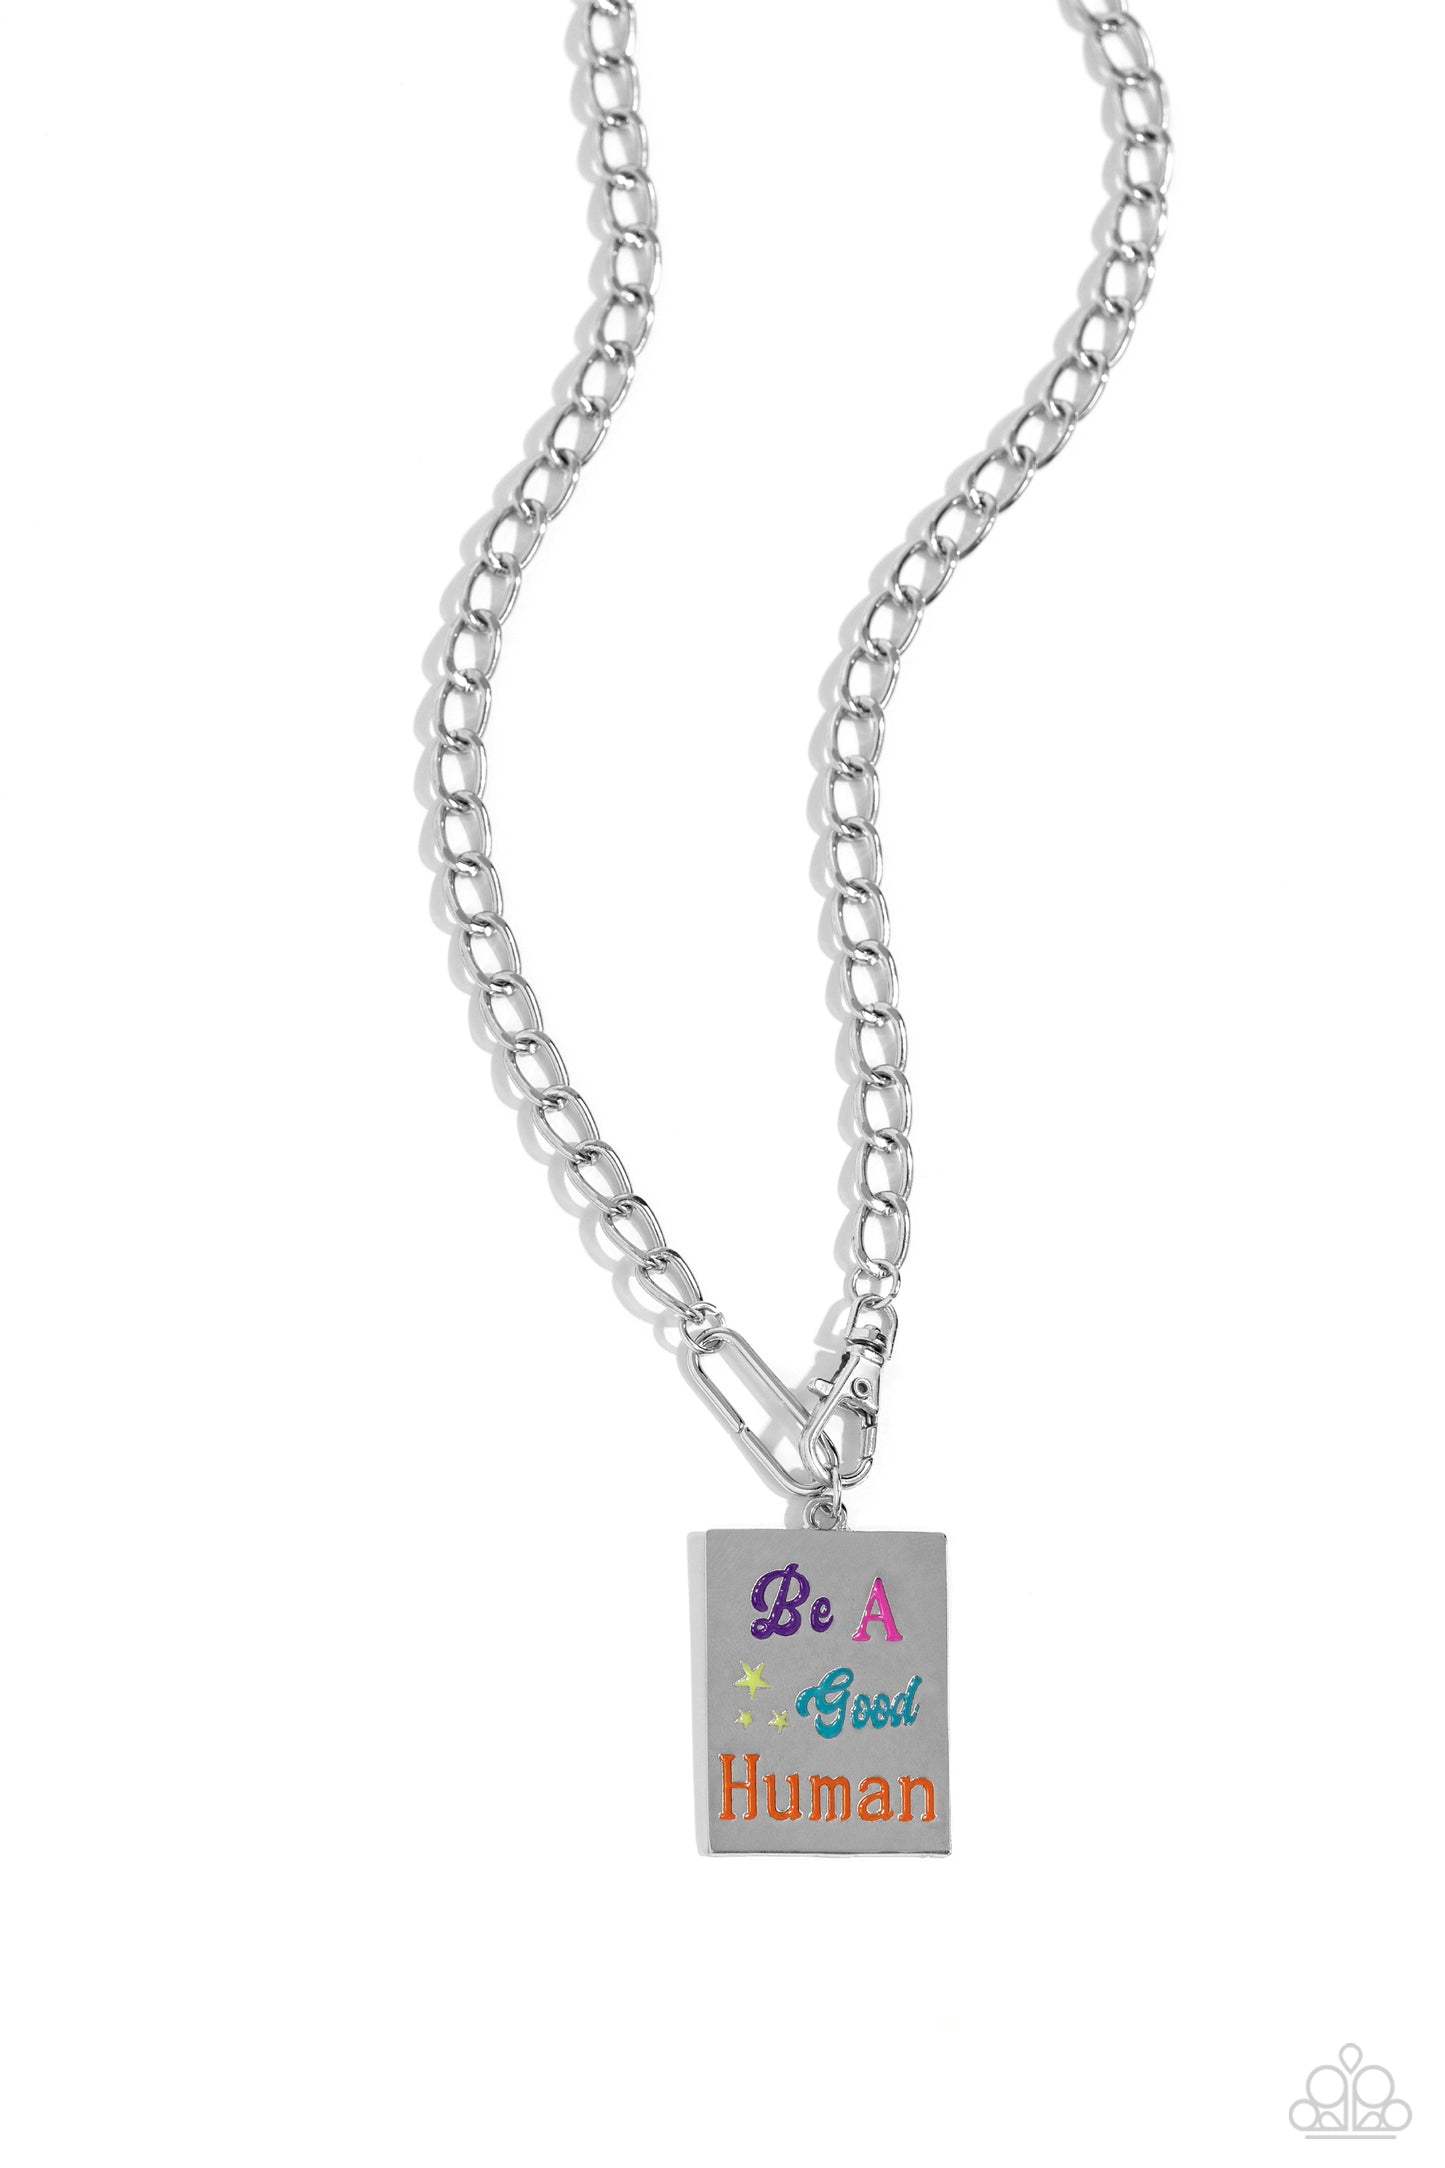 Be A Good Human - Multi Necklace